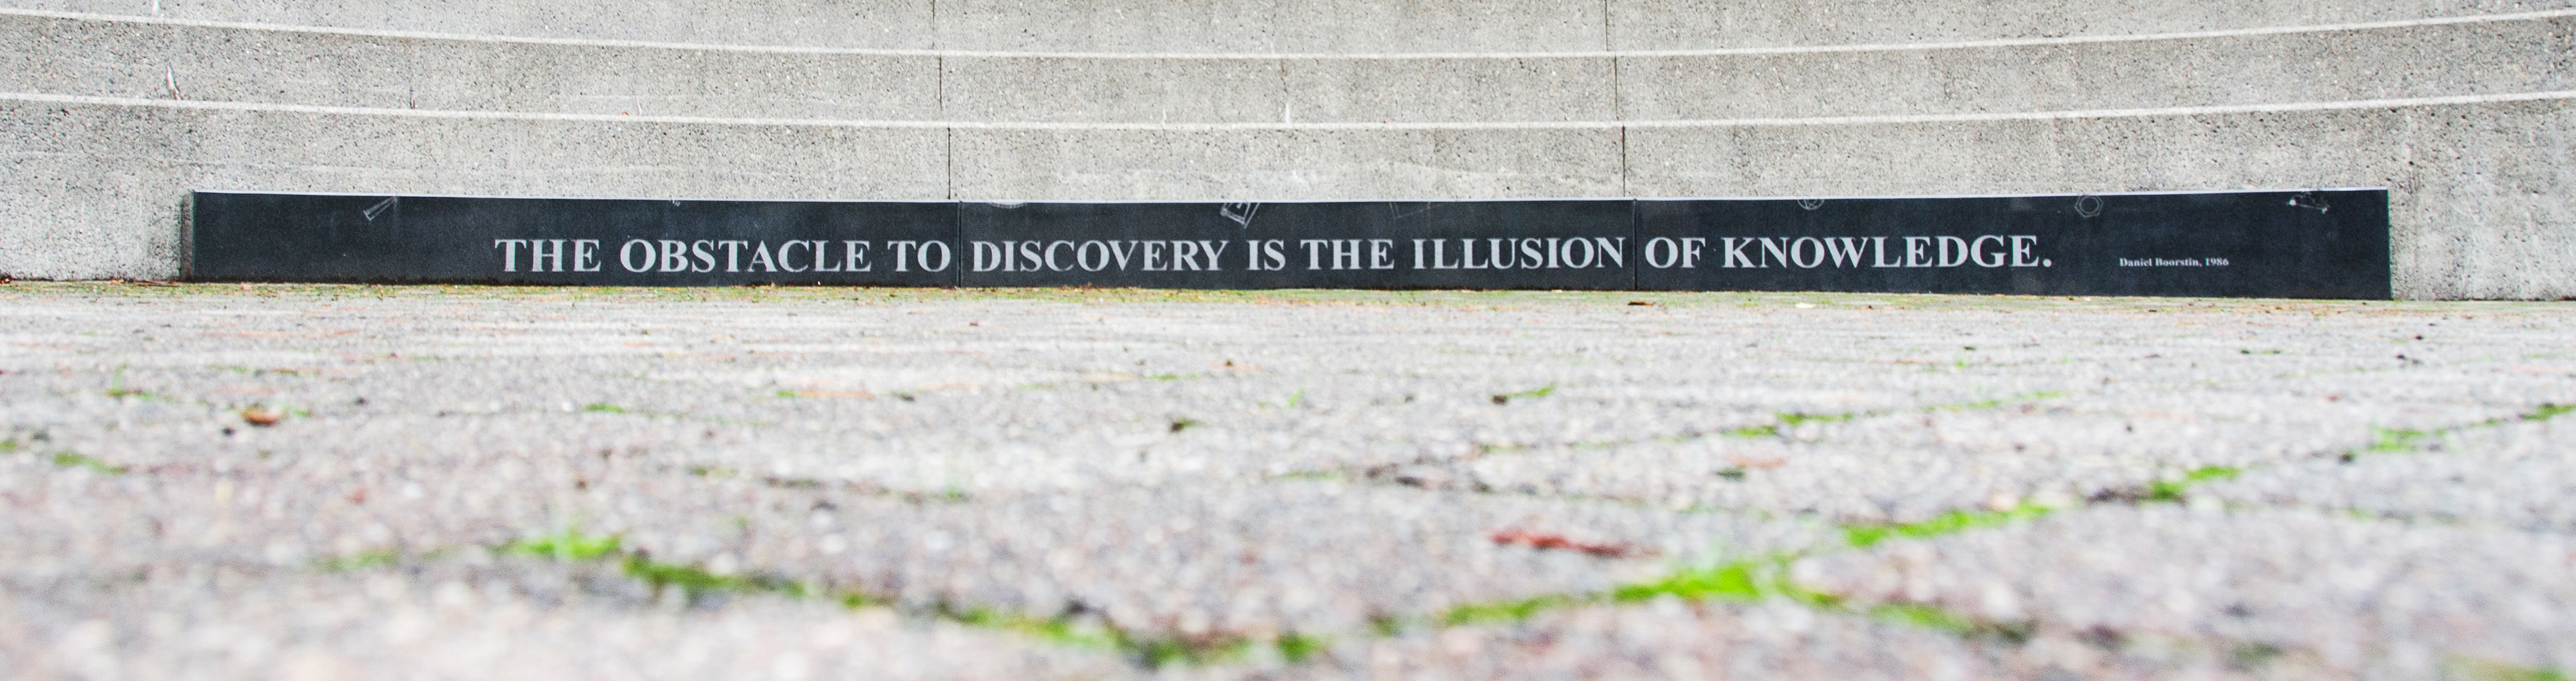 Sculpture with Daniel McClintik quote, "The obstacle to discovery is the illusion of knowledge".